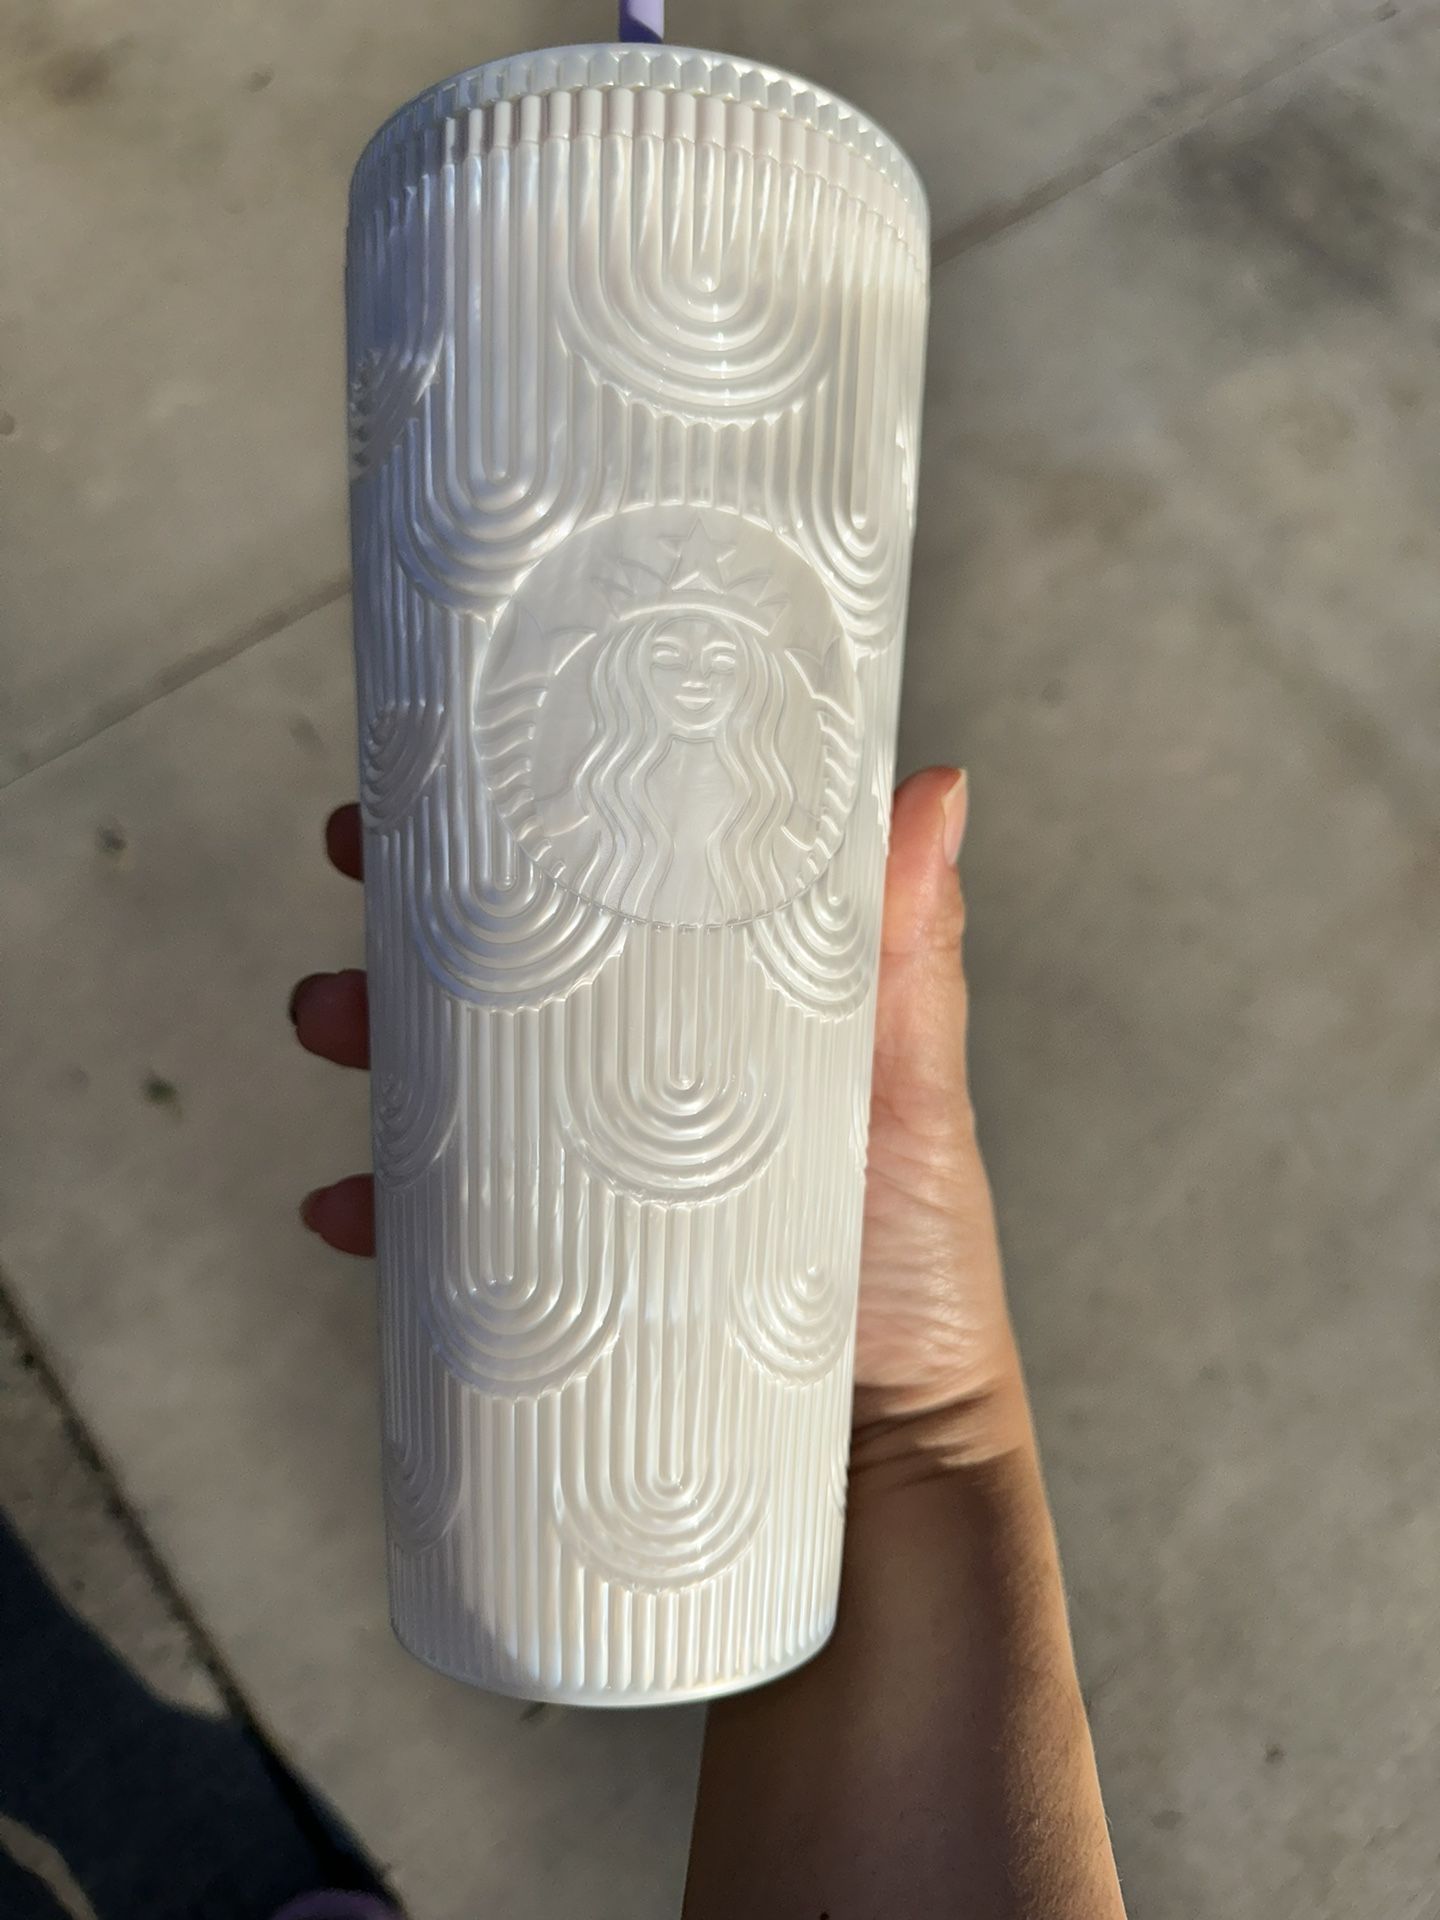 Starbucks Spring 2023 Citrus Color Changing Swirl Straw Topper Venti cup  Tumbler for Sale in Rancho Cucamonga, CA - OfferUp